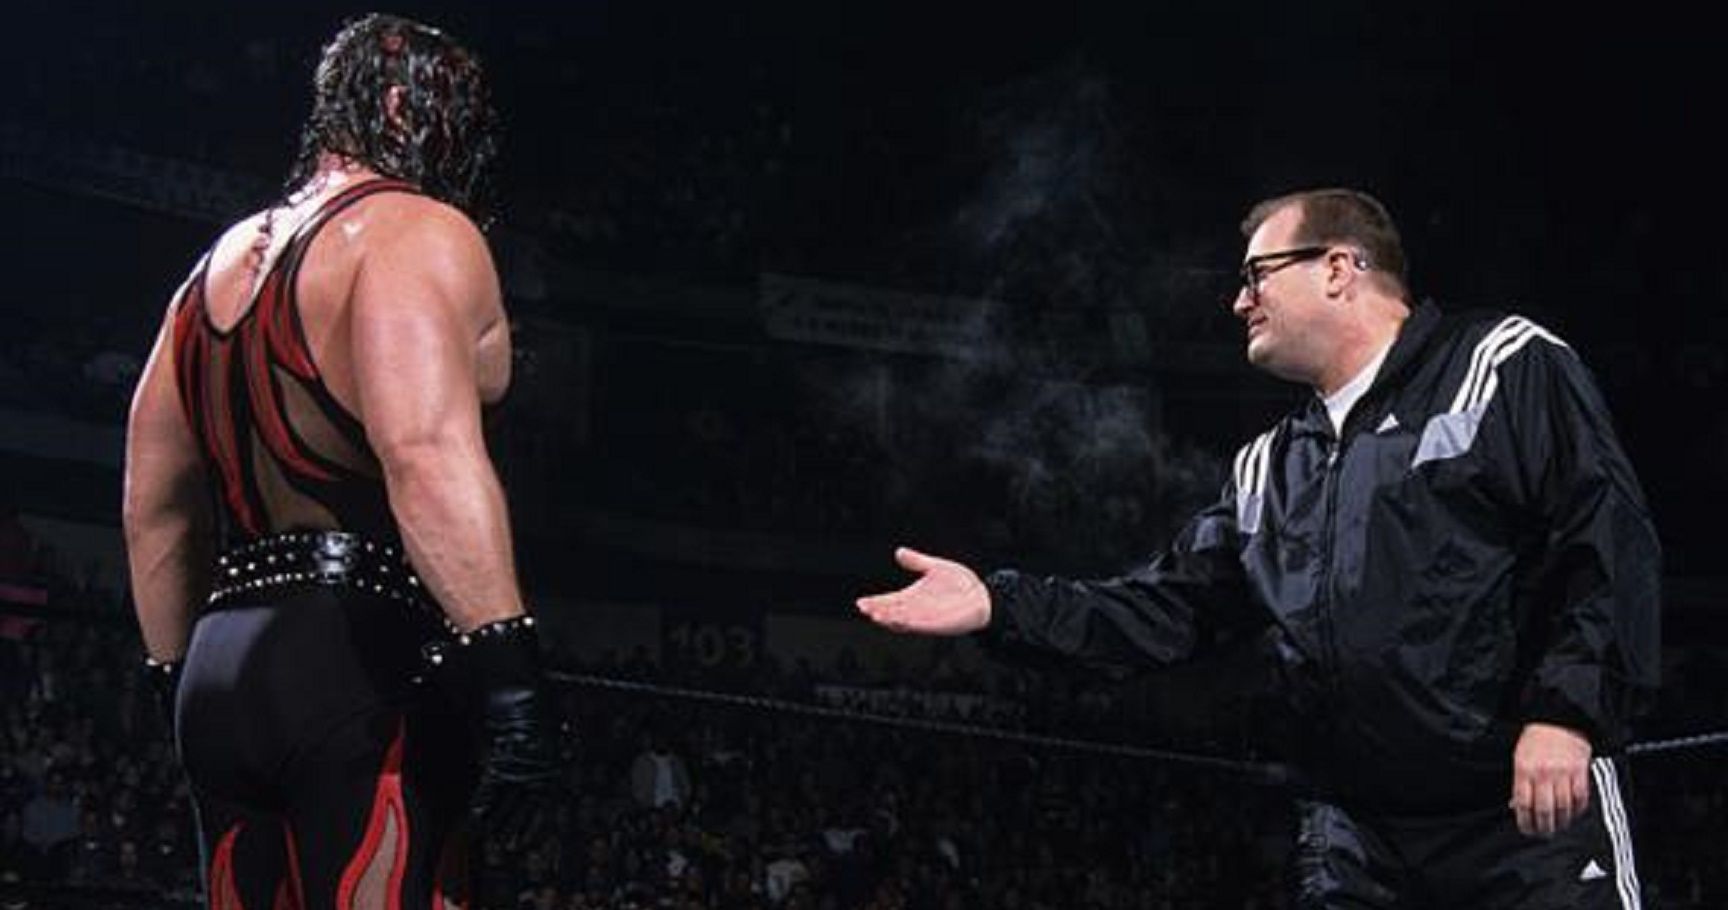 KANE AND DREW CAREY ARE FACE TO FACE IN WWE